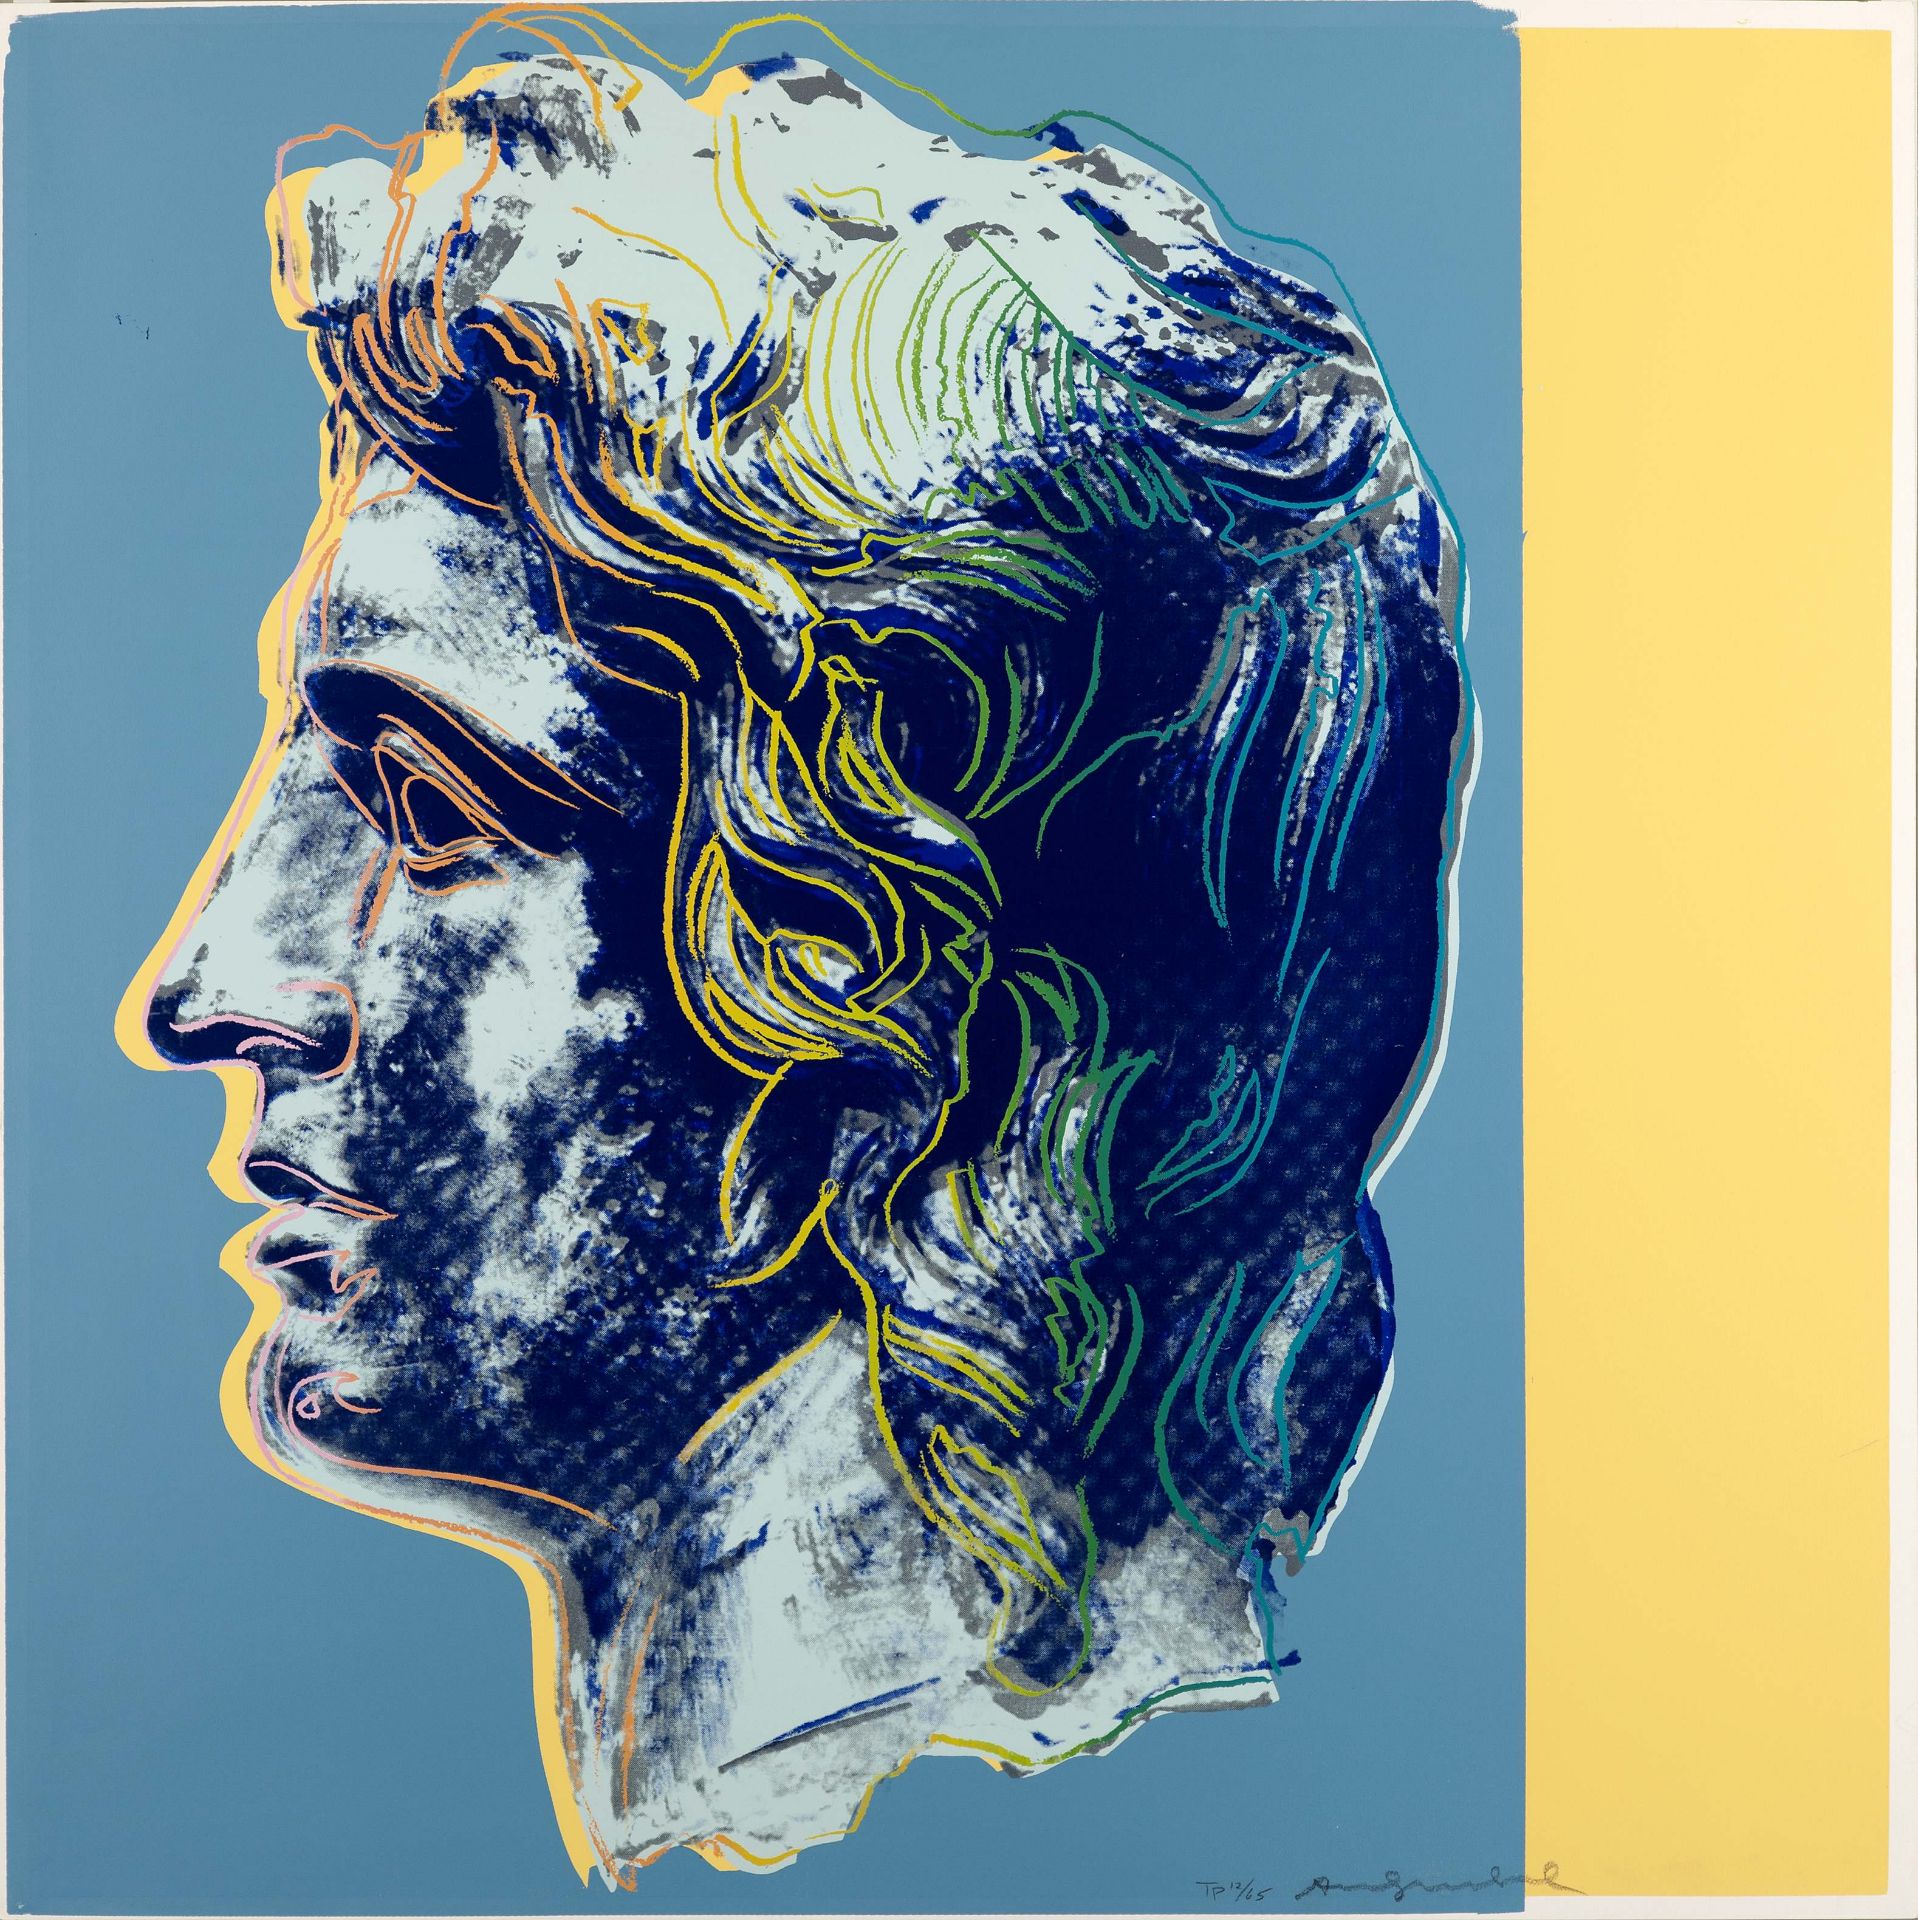 ANDY WARHOL (1928-1987) Alexander the Great (F&S. II.291-292)